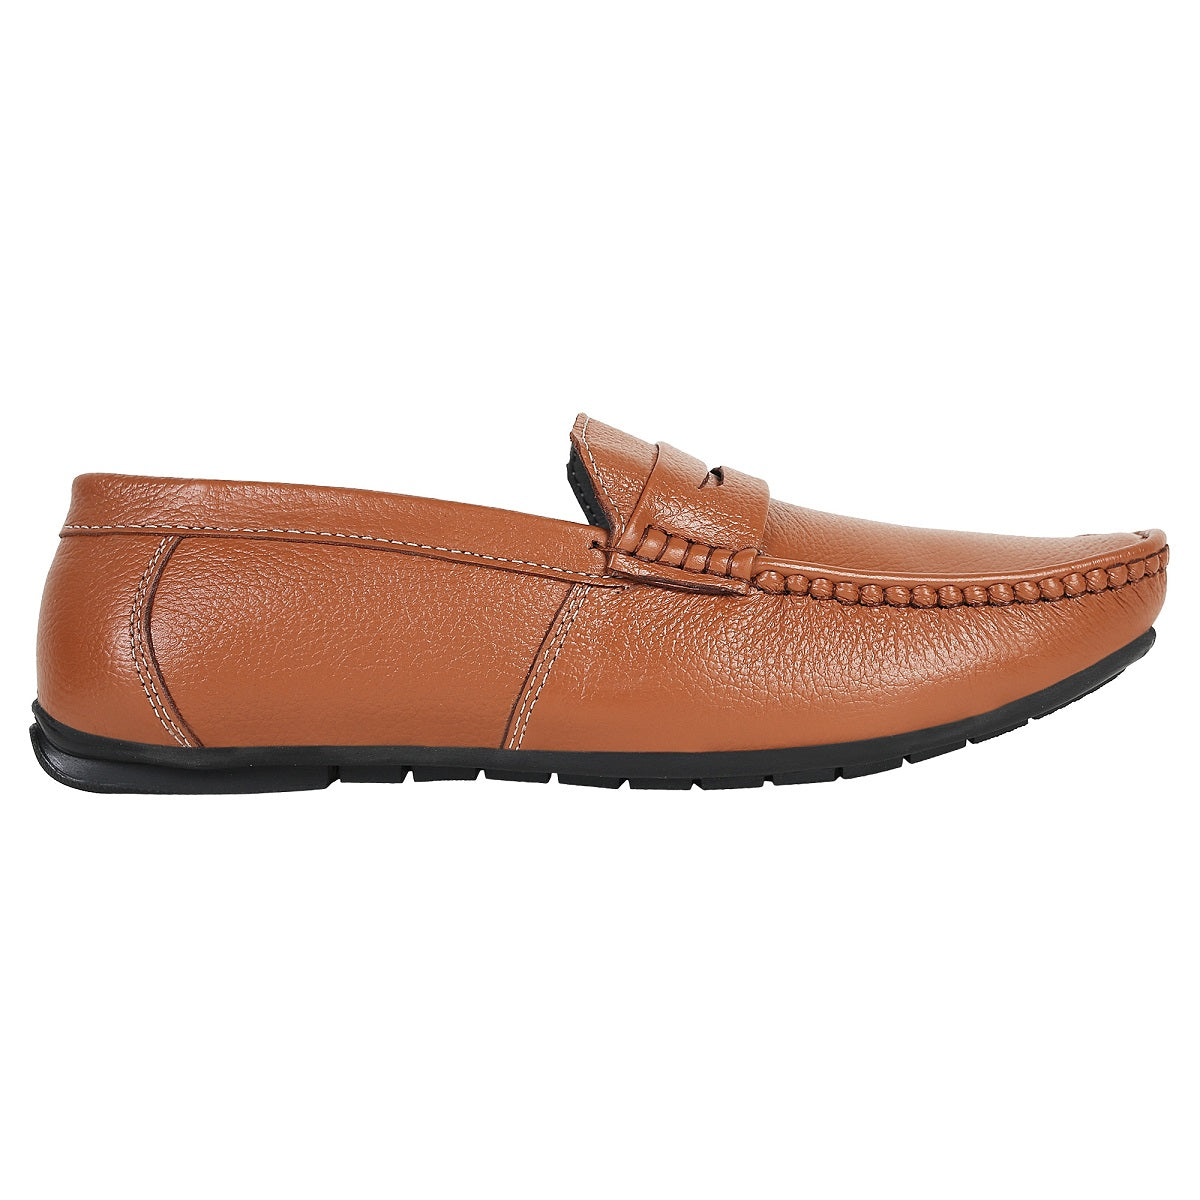 Tan Leather Loafers for Men